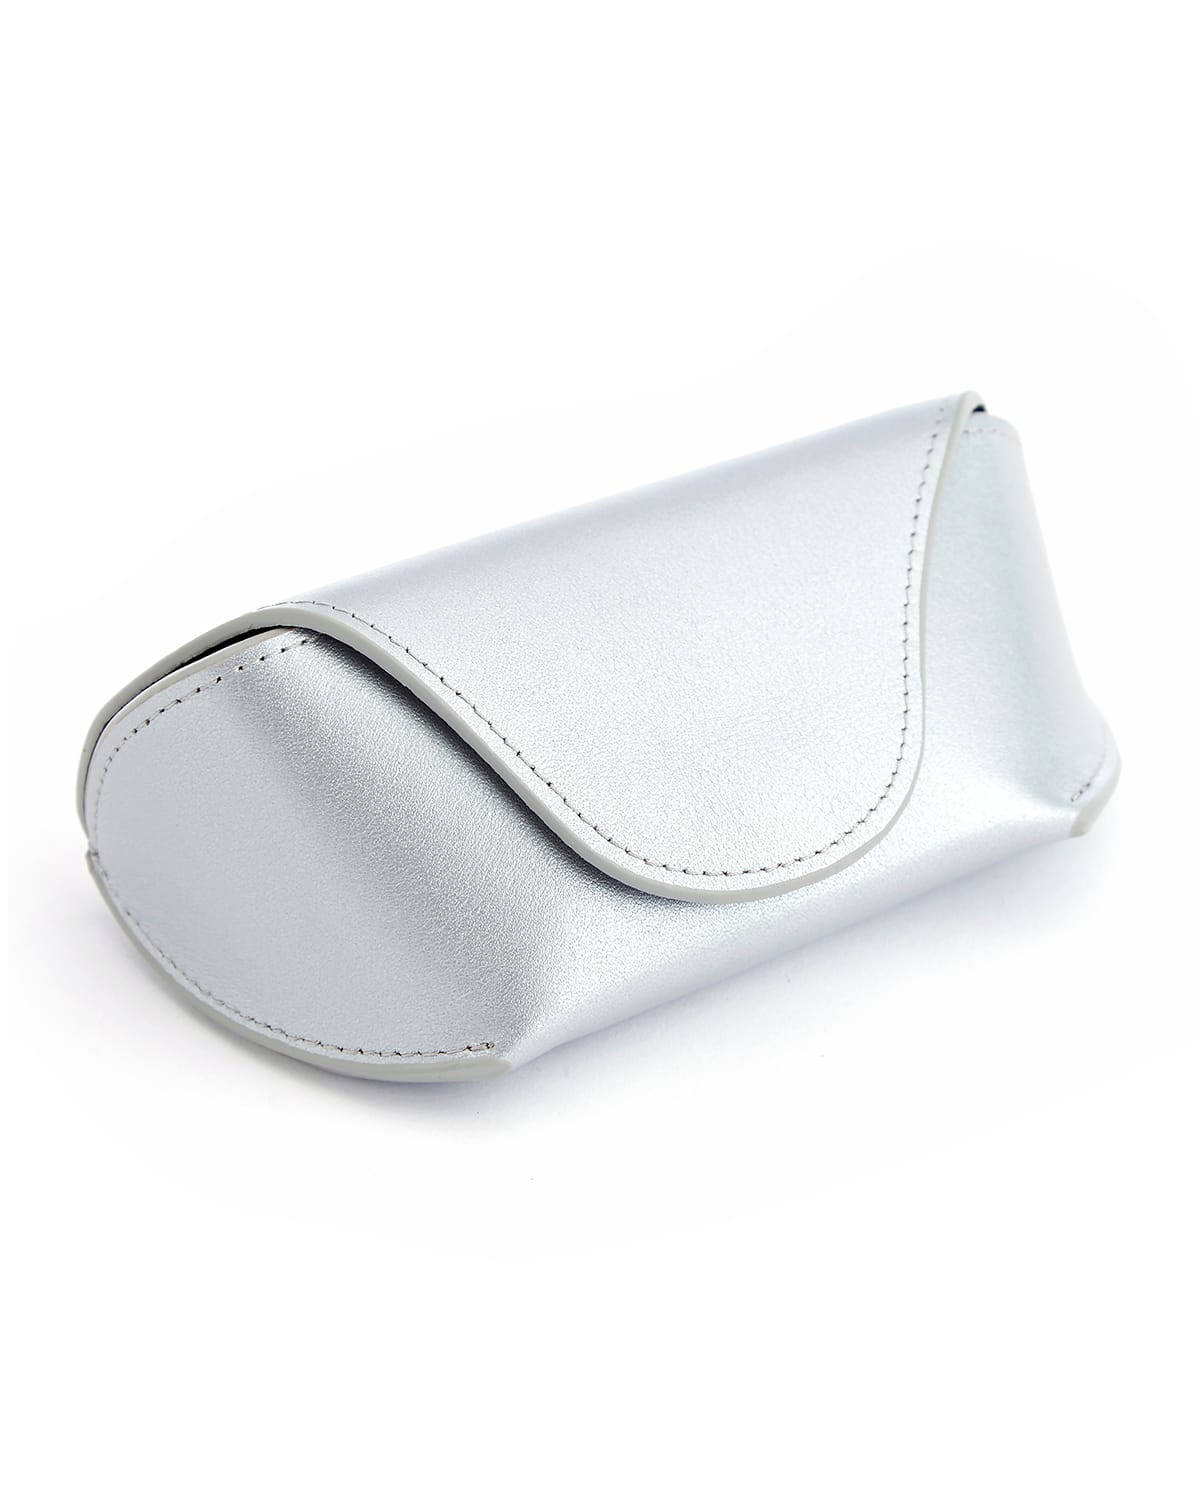 Royce New York Suede Lined Sunglasses Carrying Case In Silver